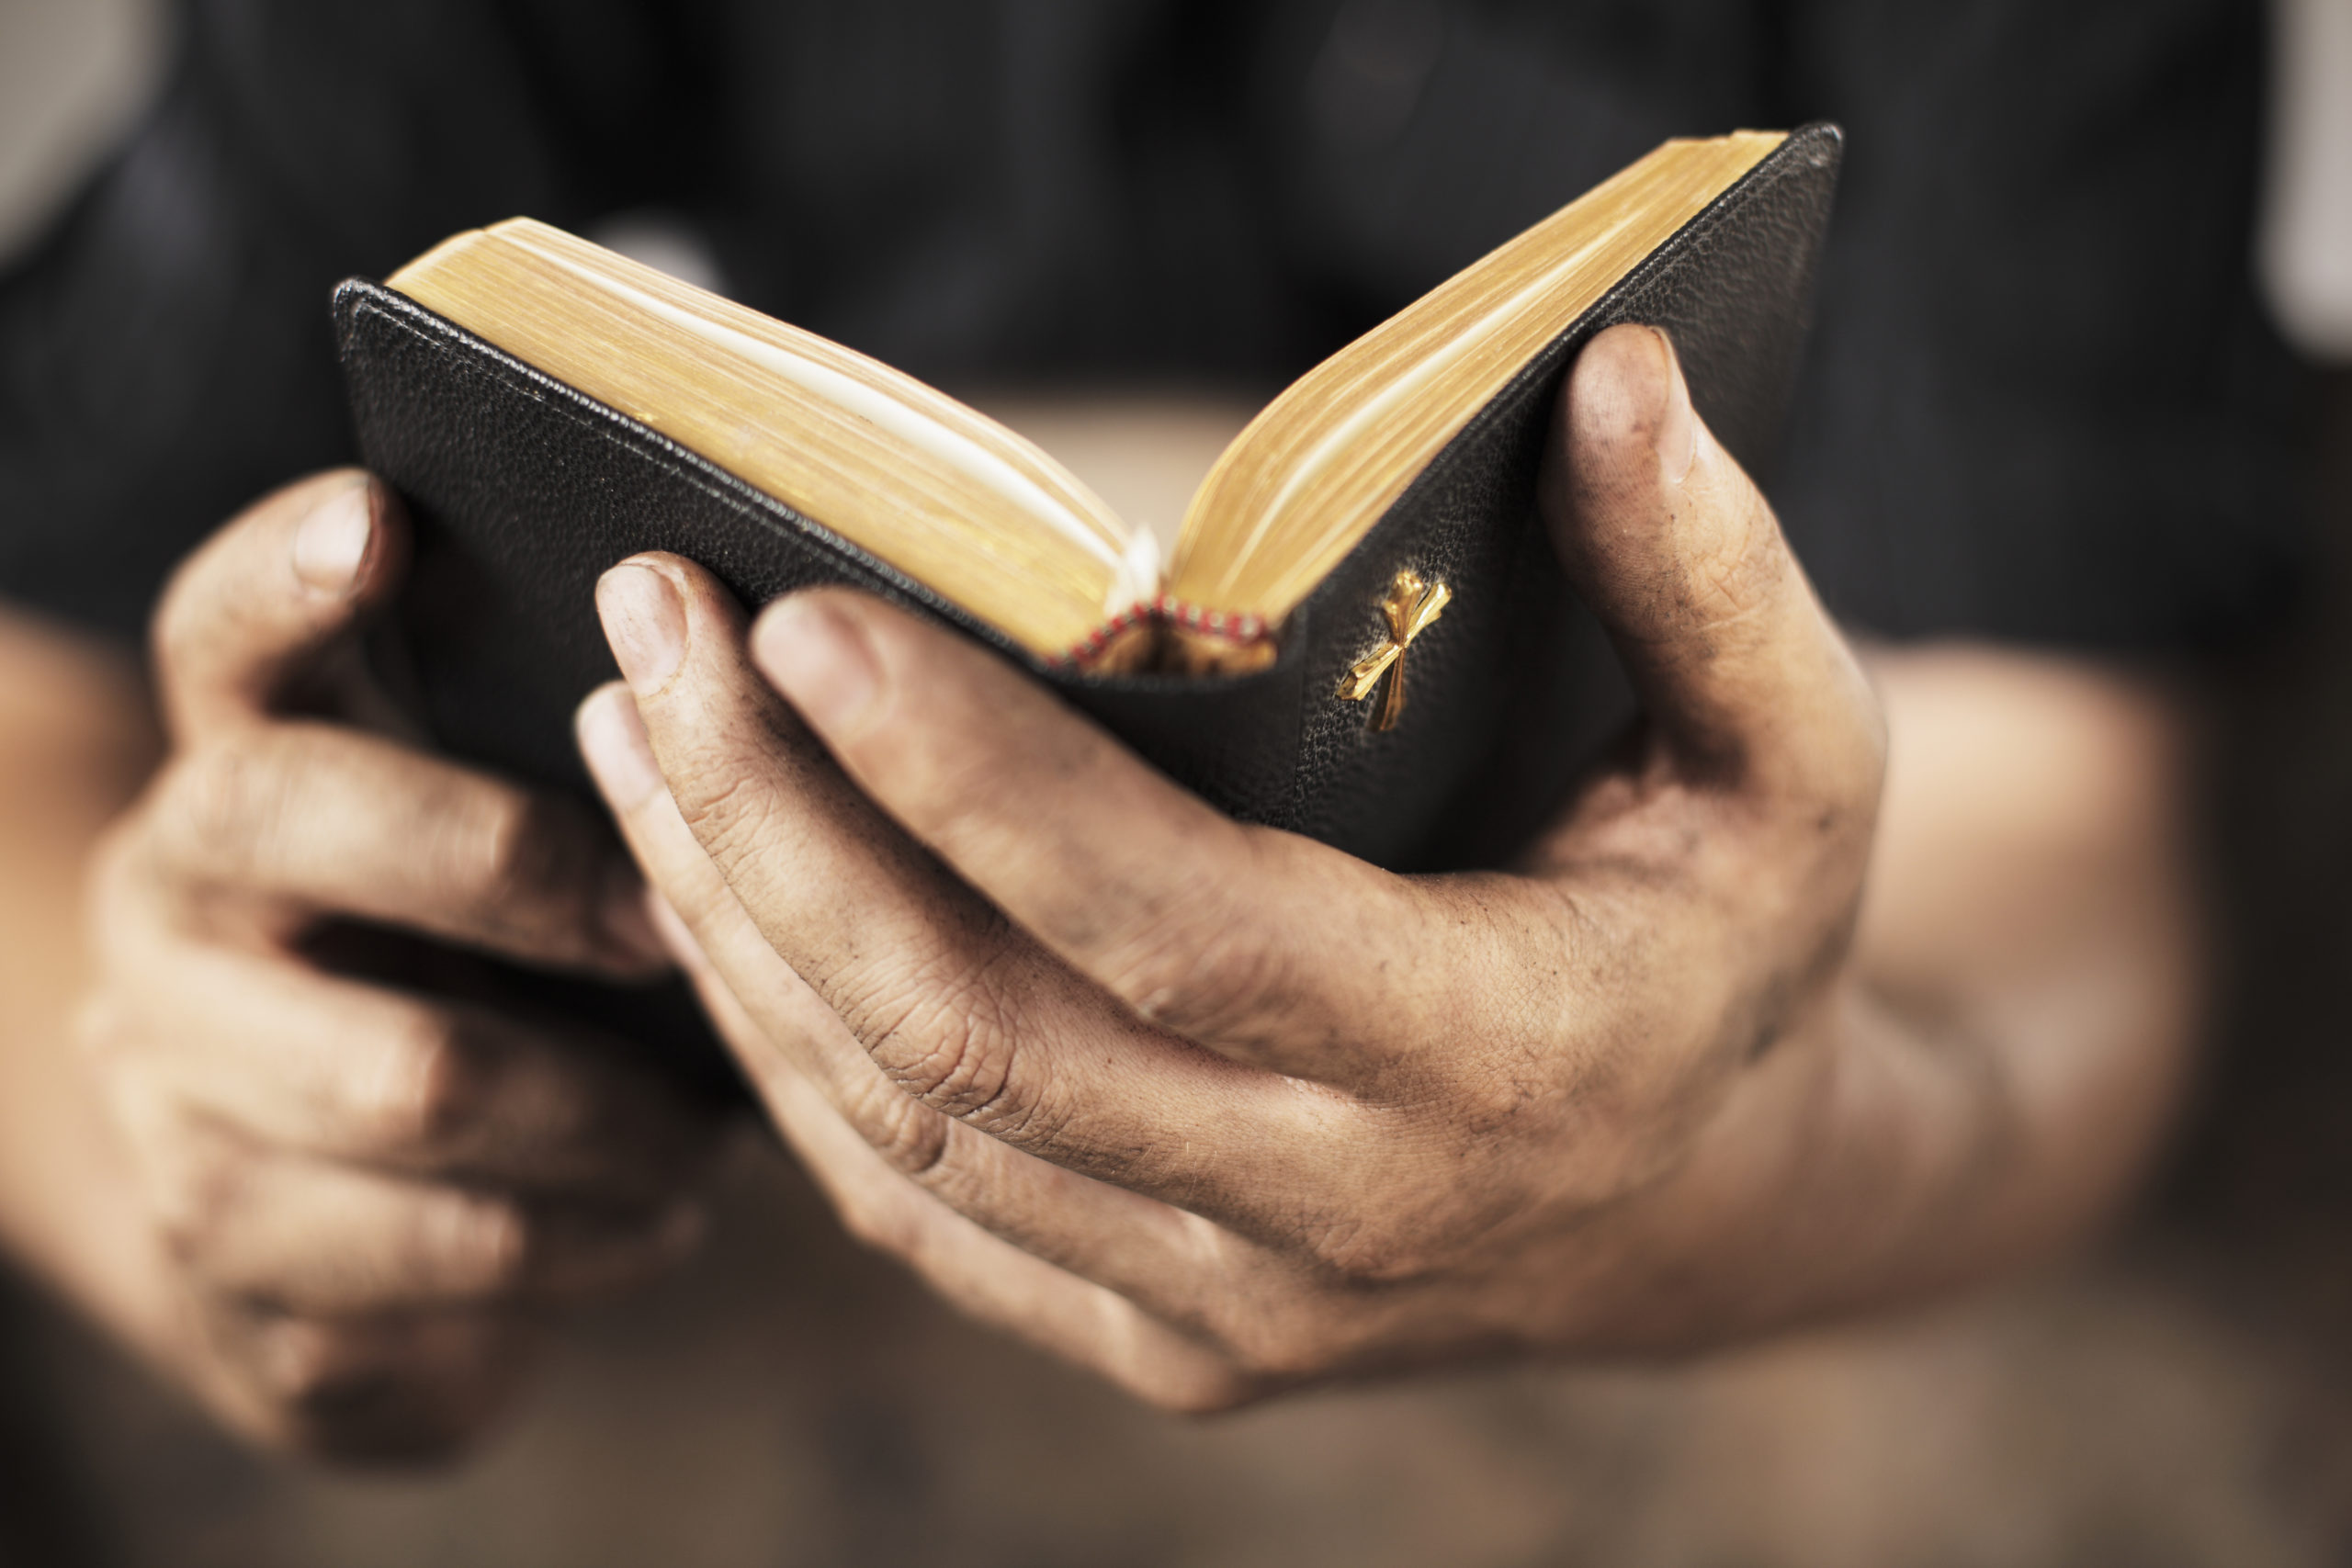 Bible Sells Up During the Pandemic - Many Christian Publishers are reporting that Bible sells are up due to the COVID-19 Coronavirus pandemic. People are looking for hope! #Bible